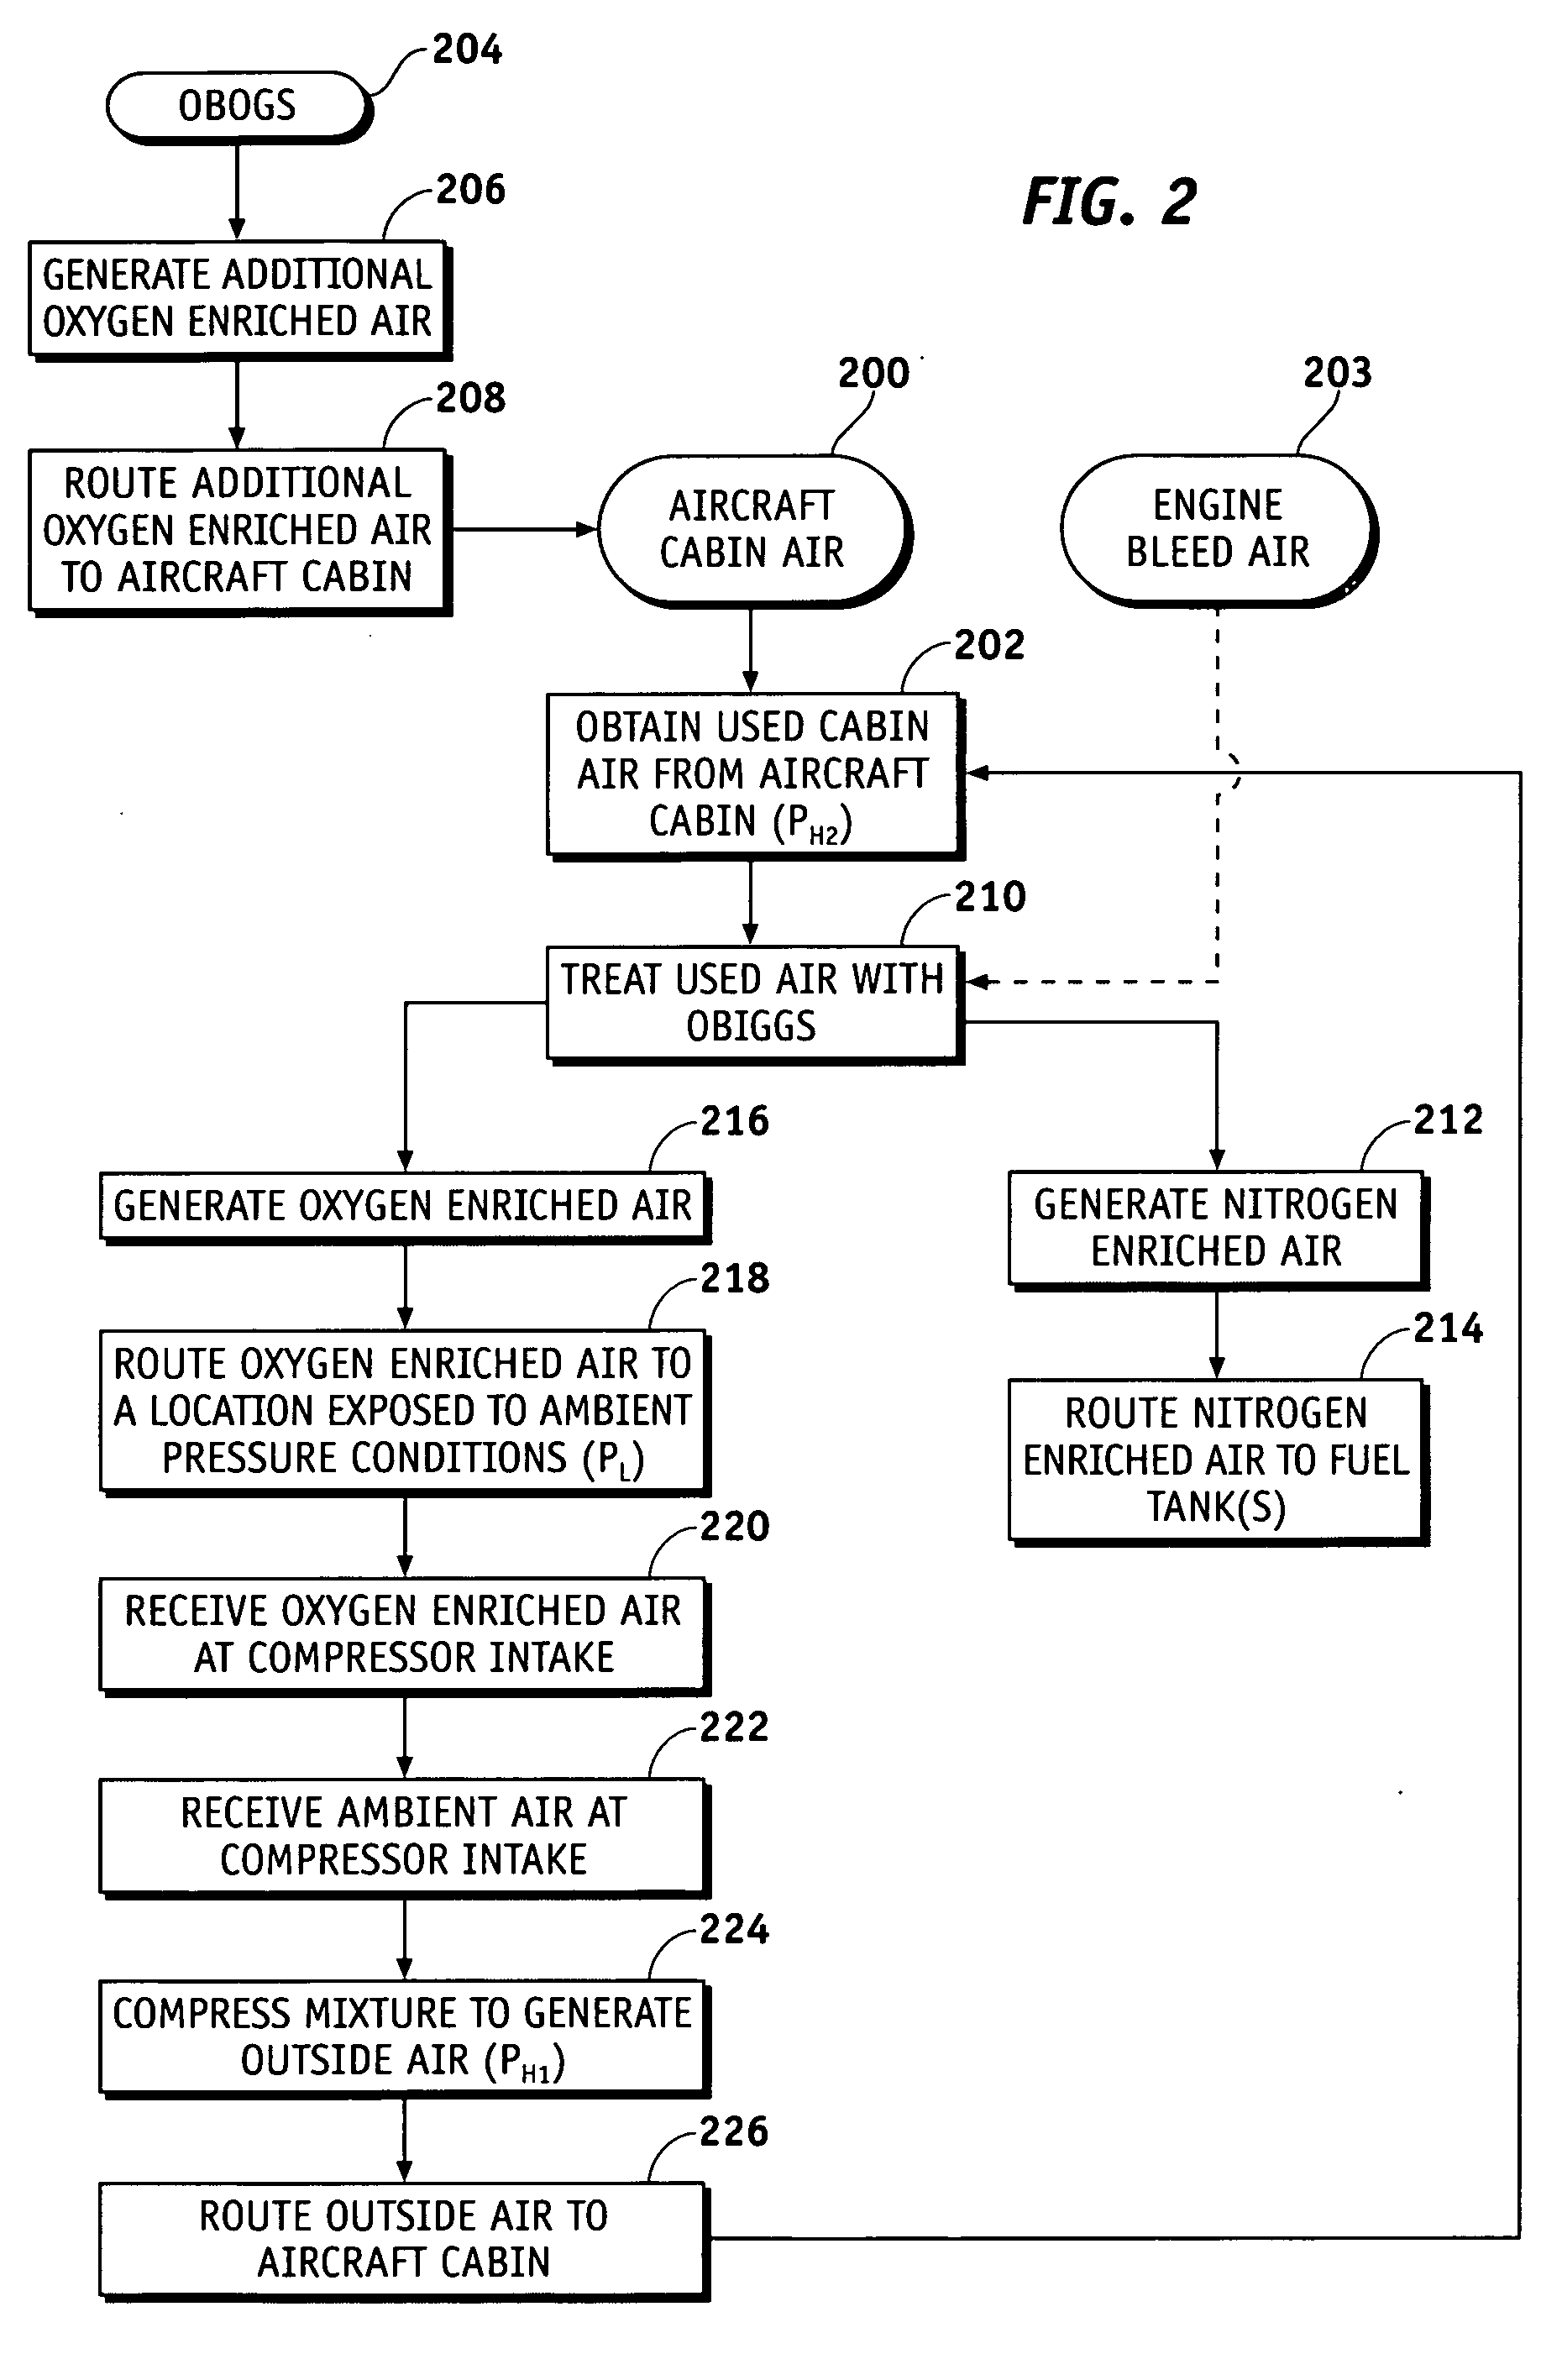 System and method for enriching aircraft cabin air with oxygen from a nitrogen generation system